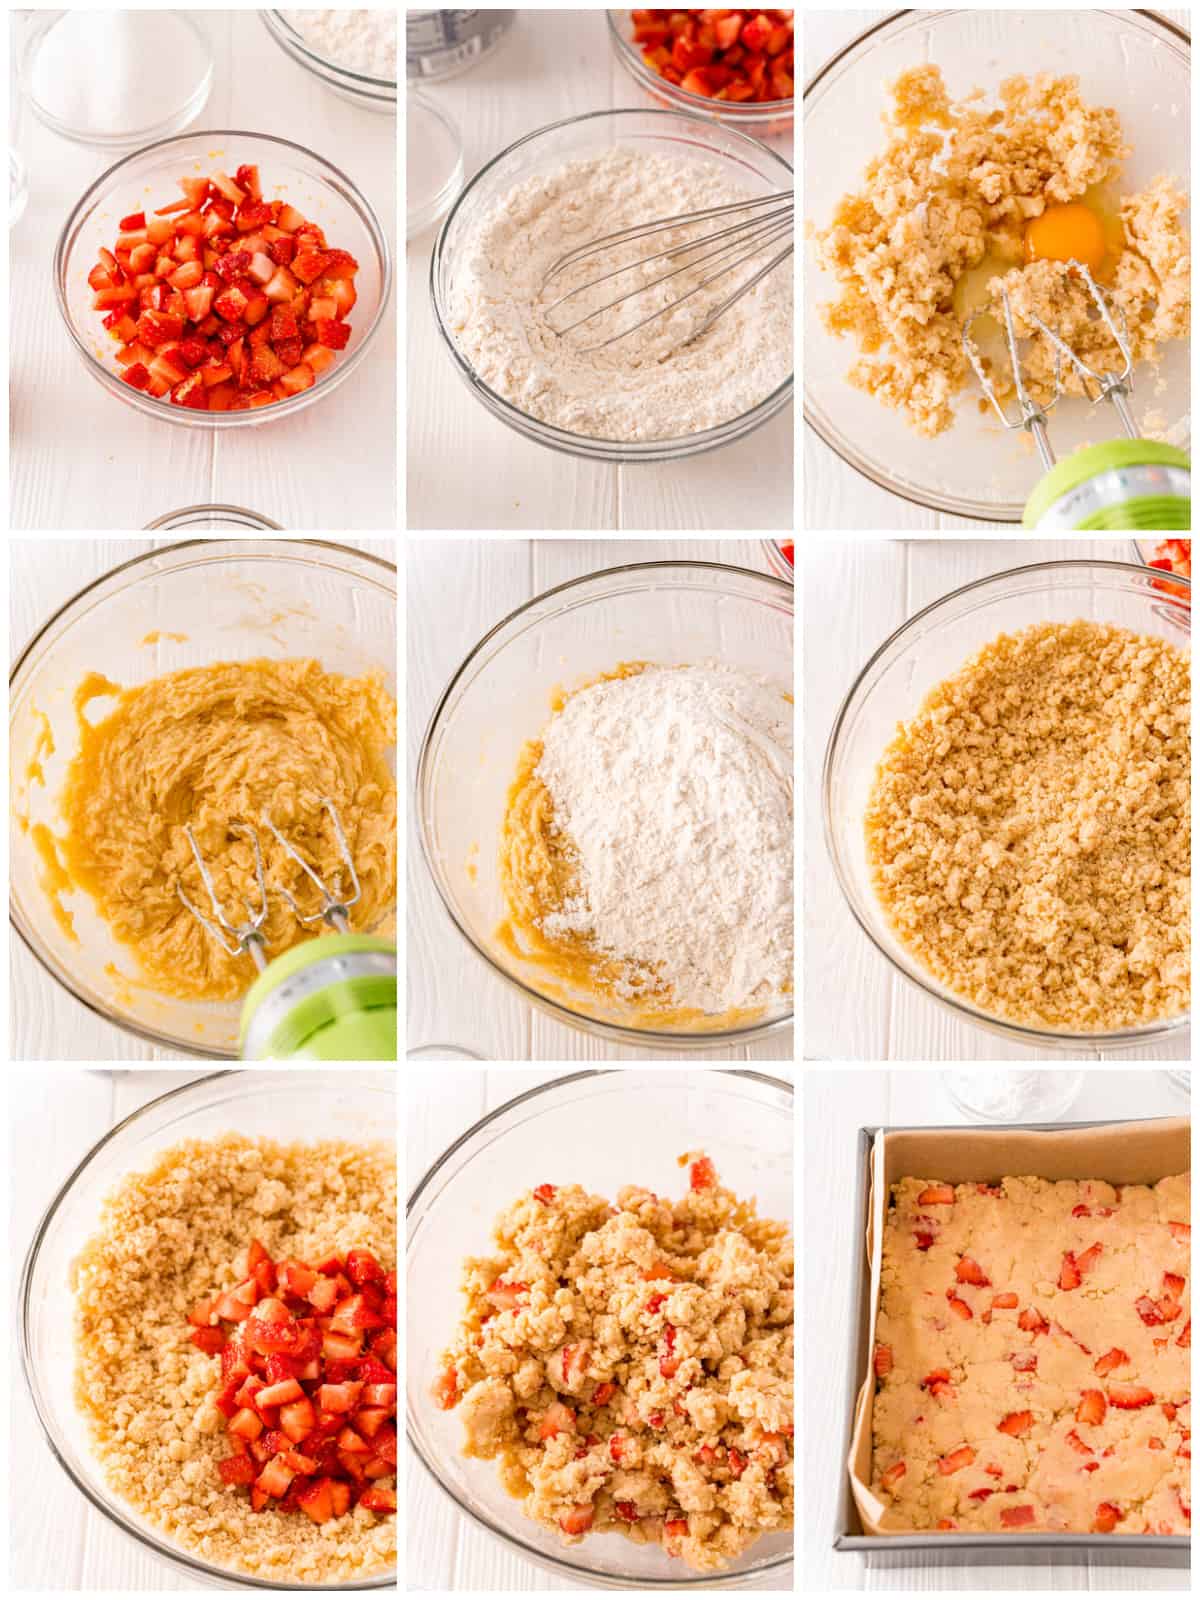 Step by step photos on how to make Strawberry Shortcake Bars